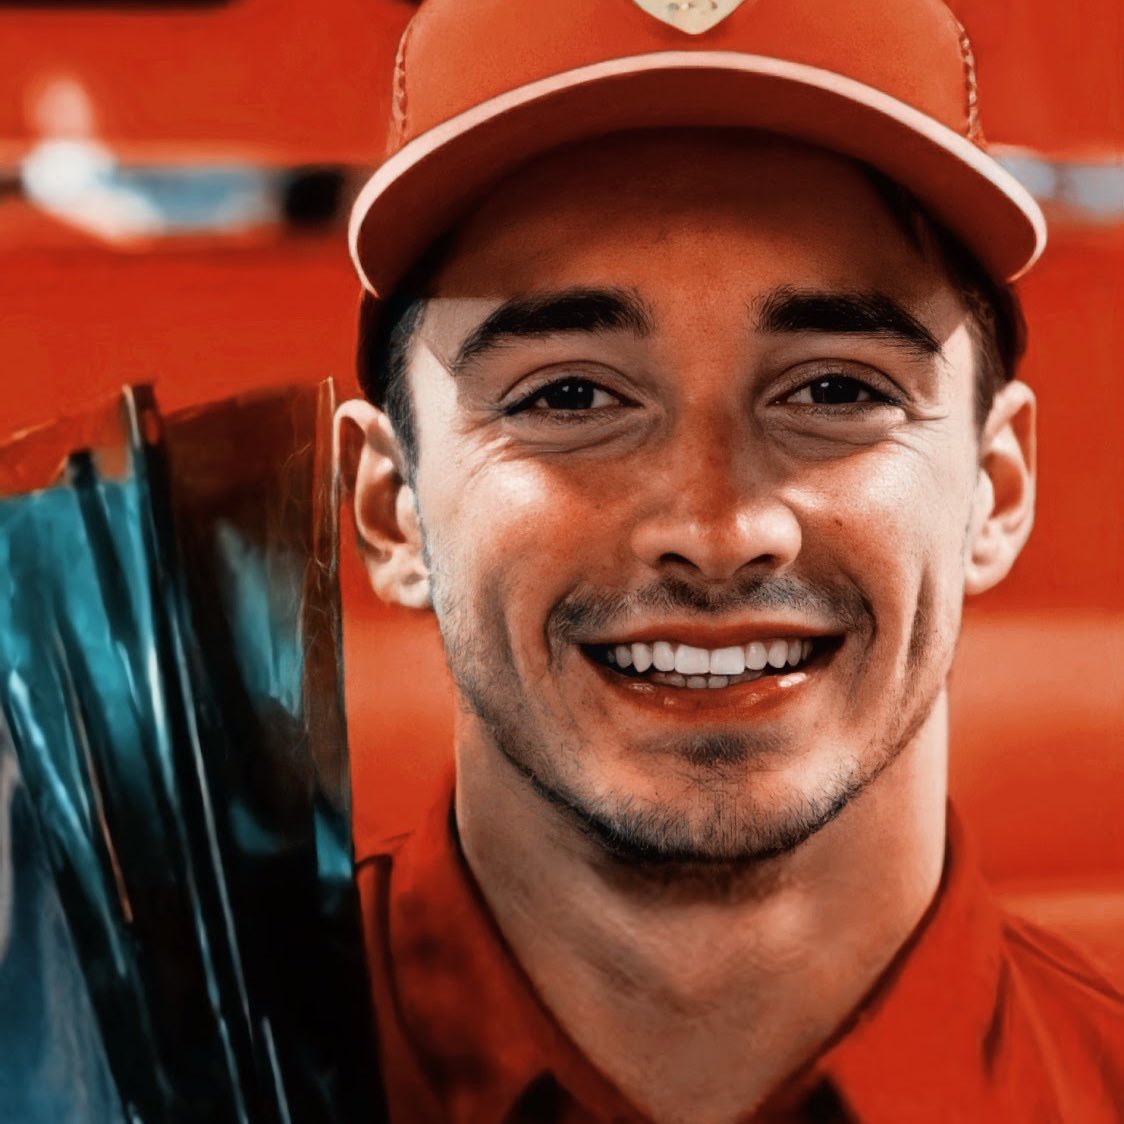 ♡ day 22Today I was scrolling through some memories of Monza 2019, it was wonderful remembering that day! Hopefully that victory was just one more in a big list of many victories! Love you so much, never forget that  @Charles_Leclerc